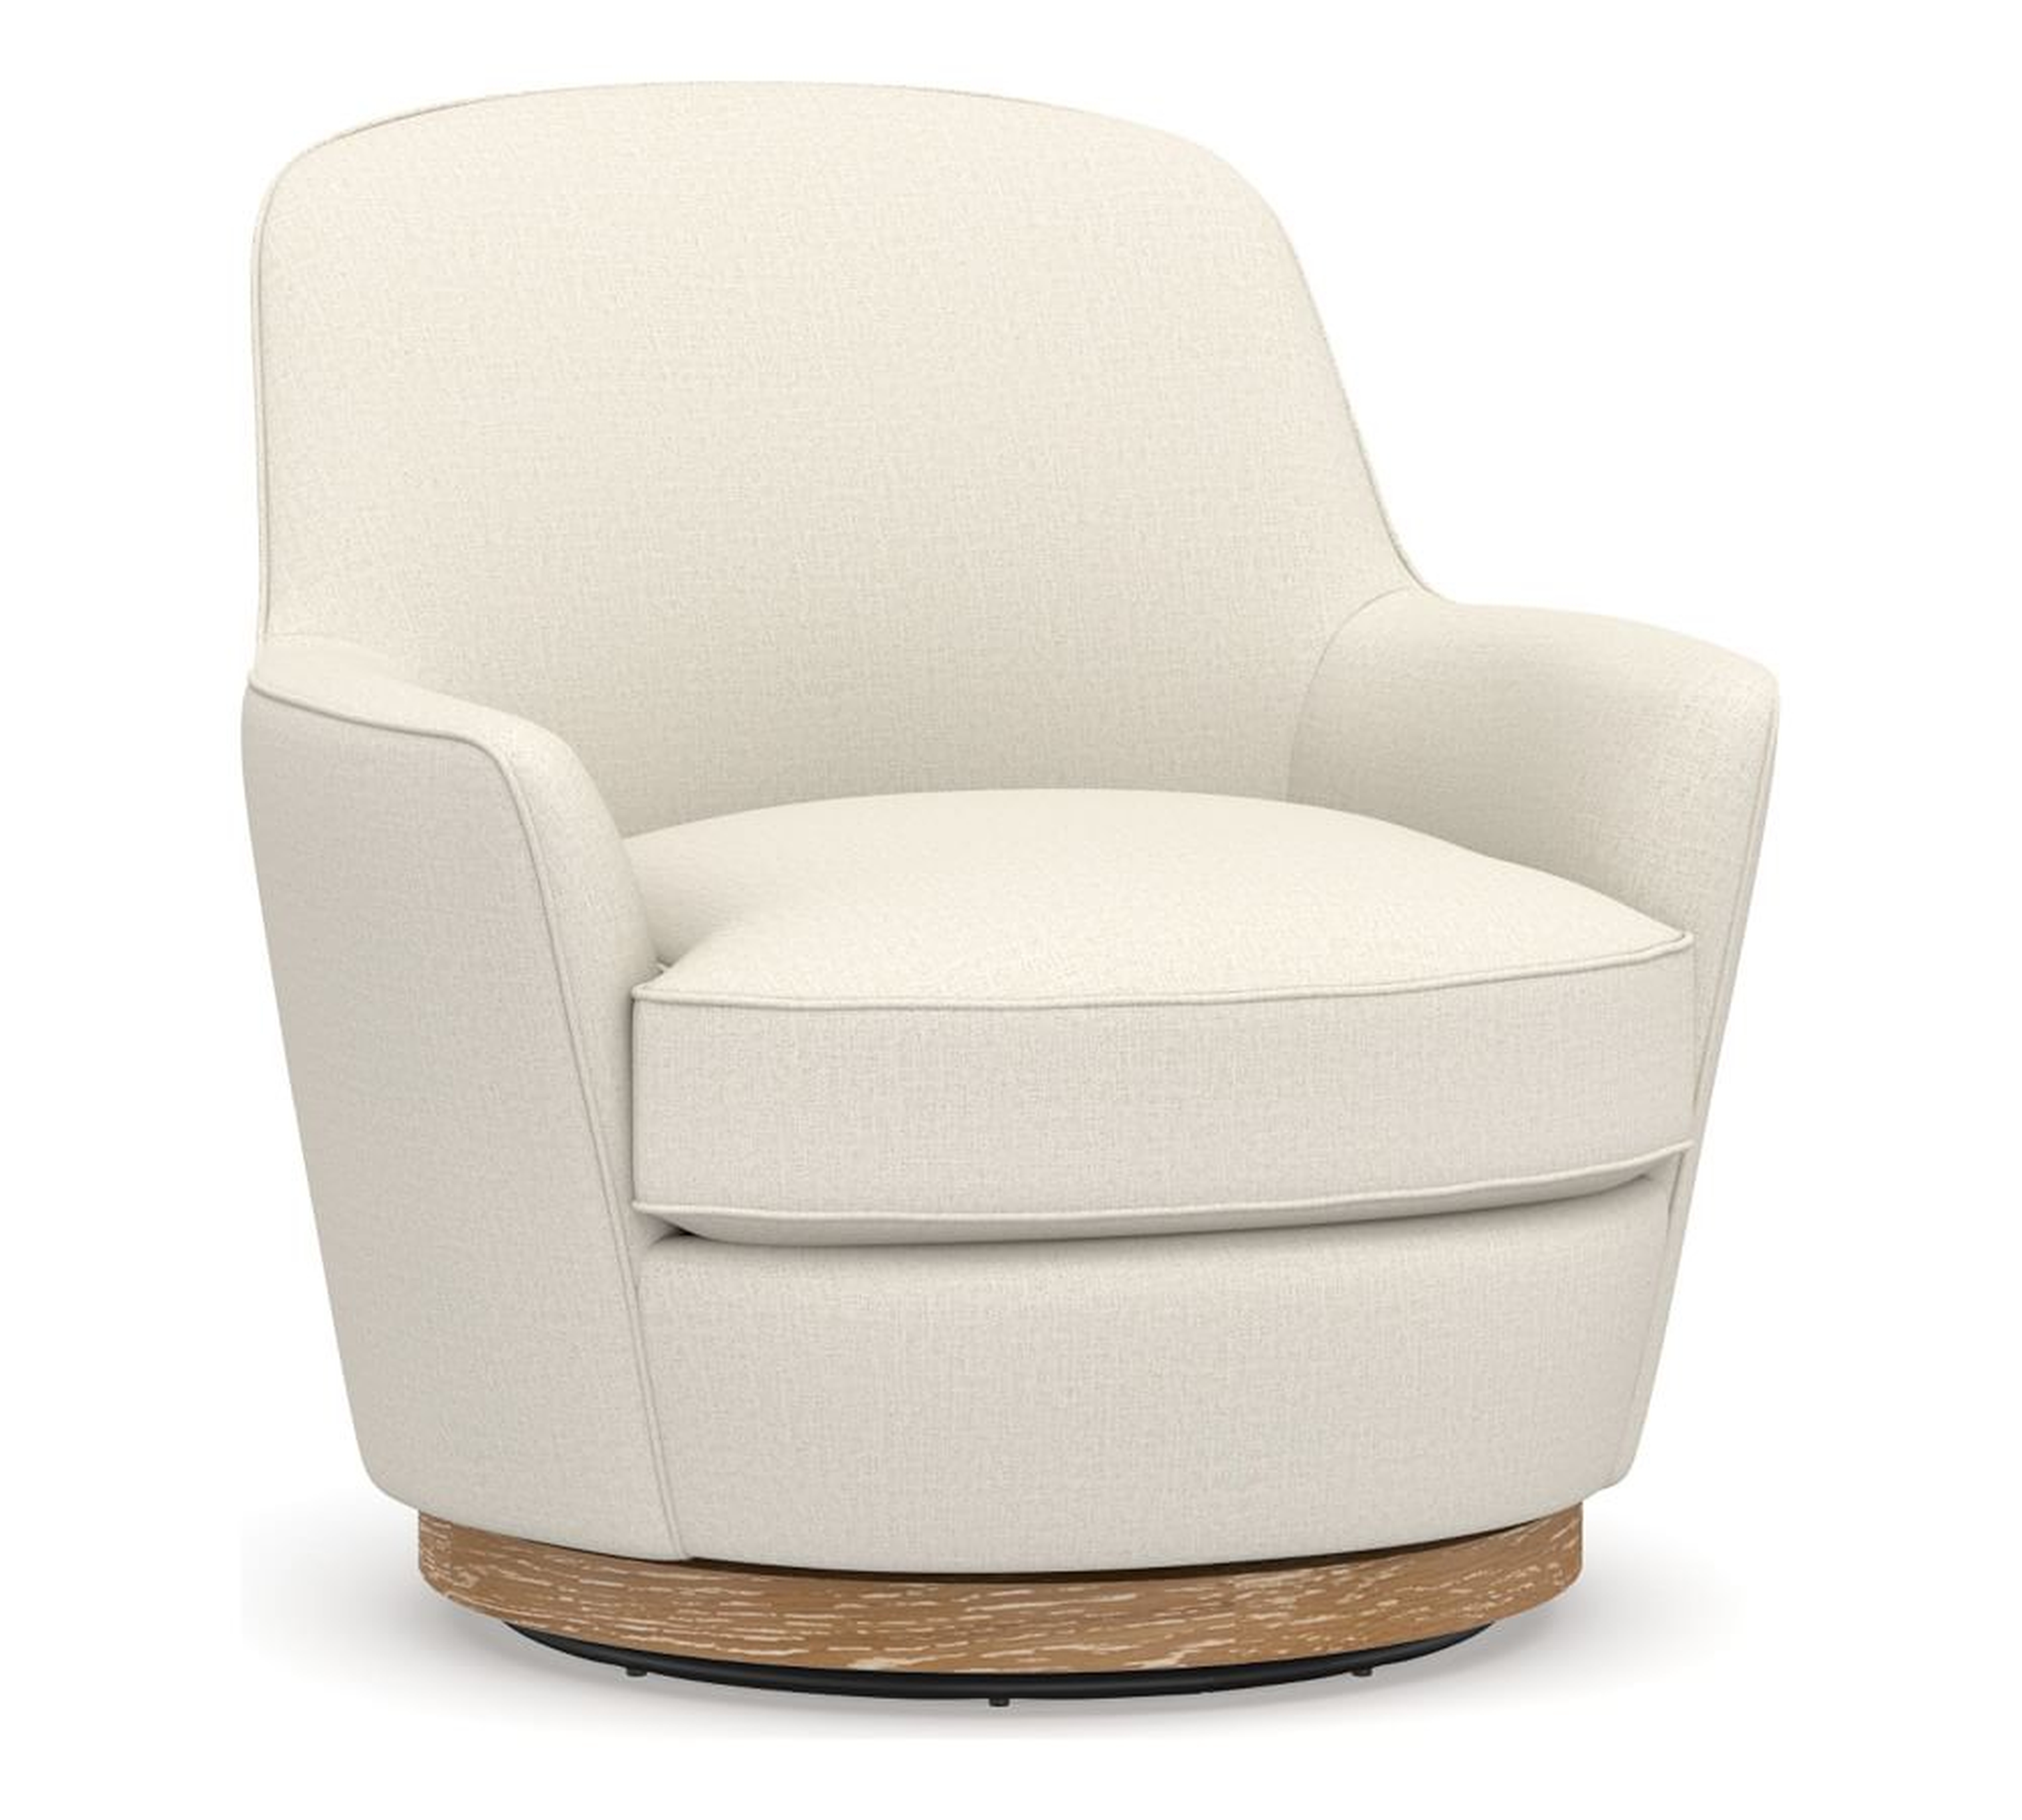 Larkin Upholstered Swivel Armchair, Polyester Wrapped Cushions, Performance Heathered Tweed Ivory - Pottery Barn